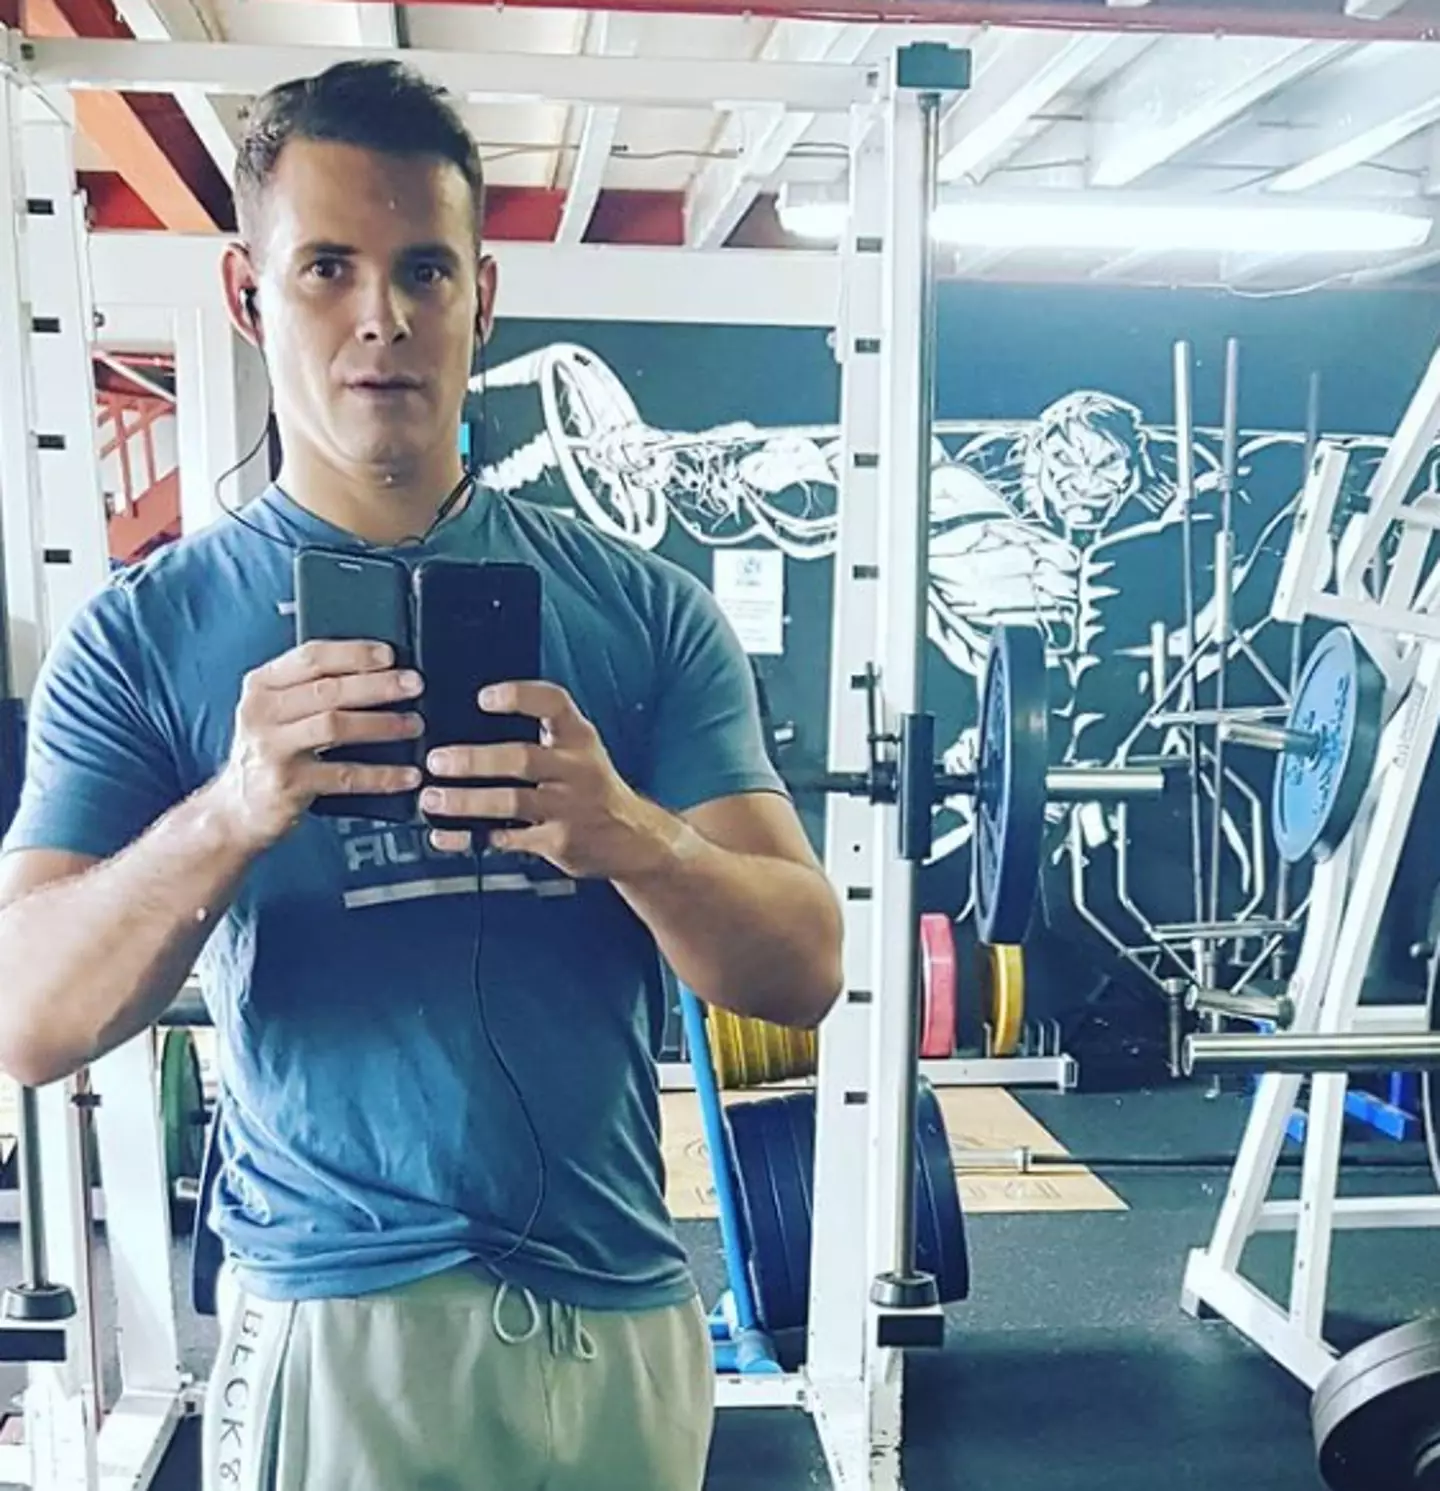 Luke regularly posts gym selfies and talks about his journey (